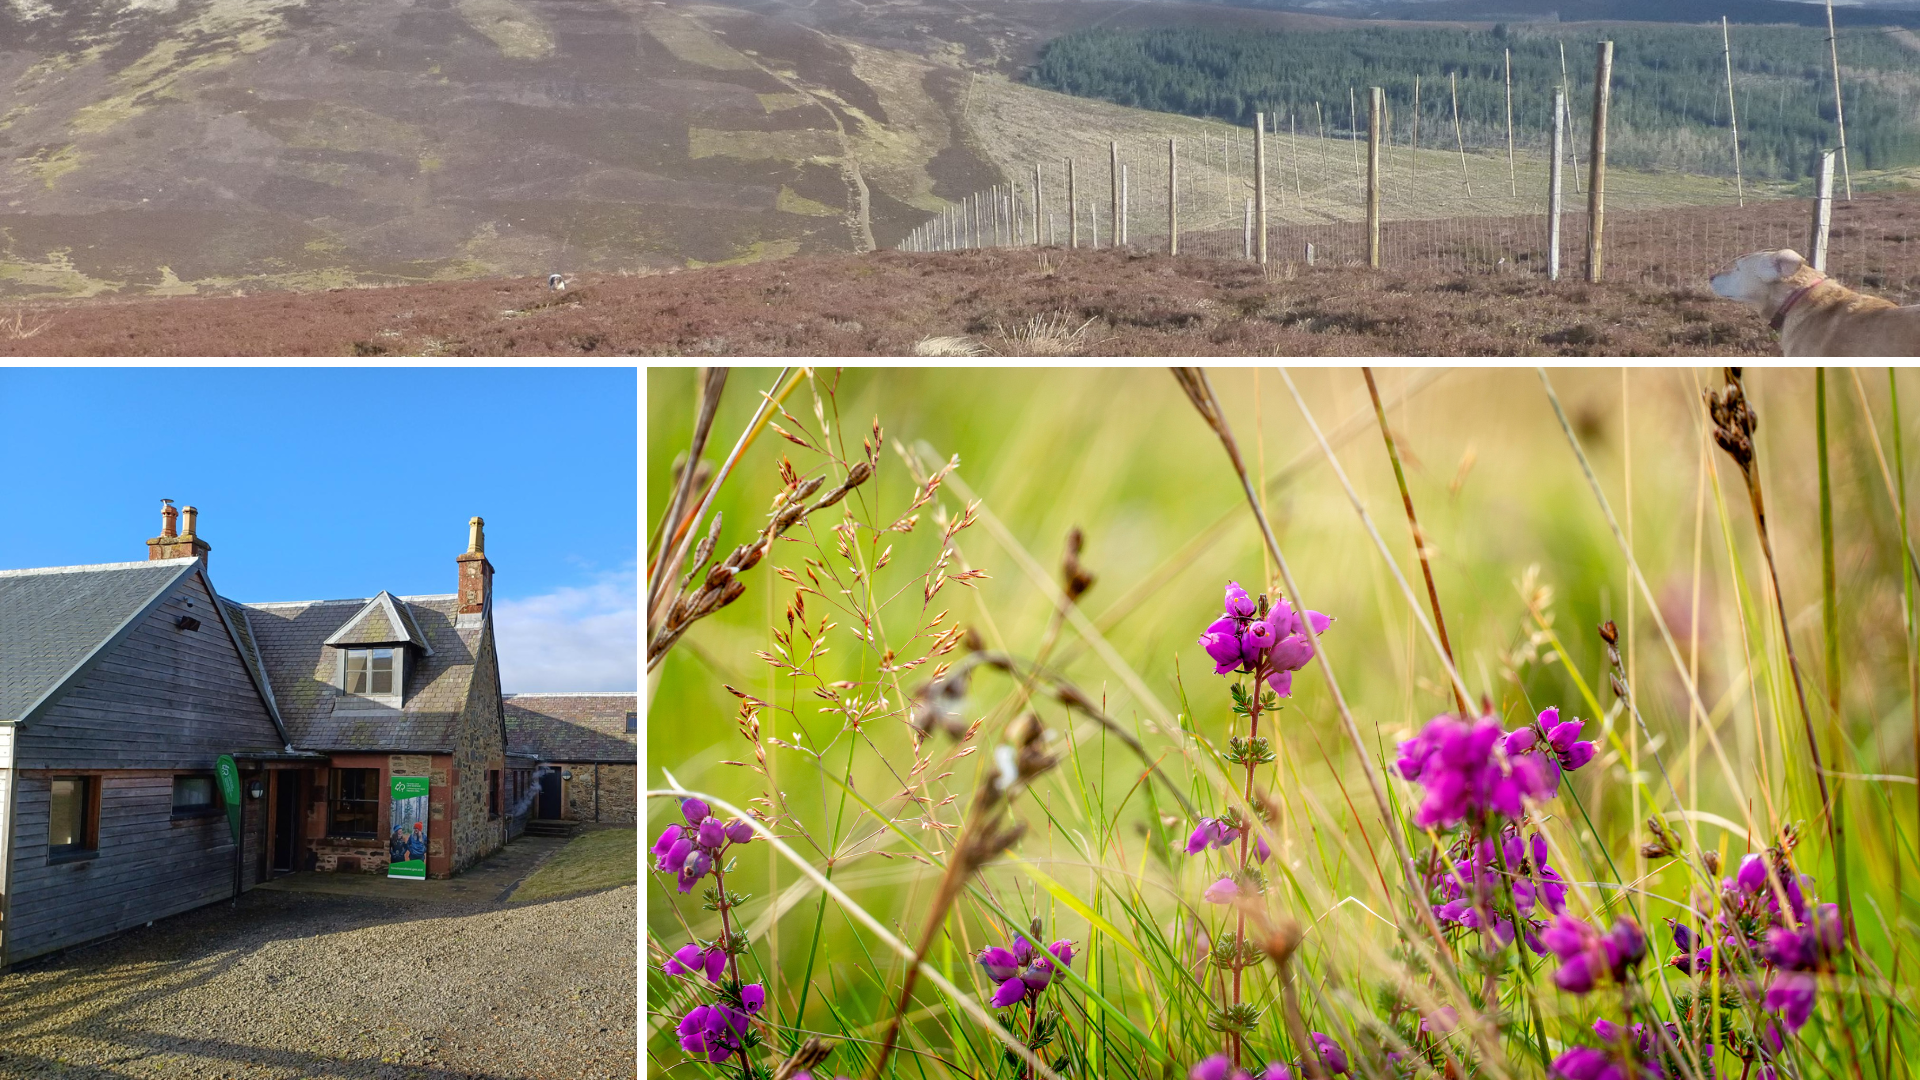 A collage of three images. Top: fencing on a hillside with a dog in the distance. Bottom left: a building with Forestry and Land Scotland branded signposting by the door. Bottom right: close up of long grass and purple flowers.